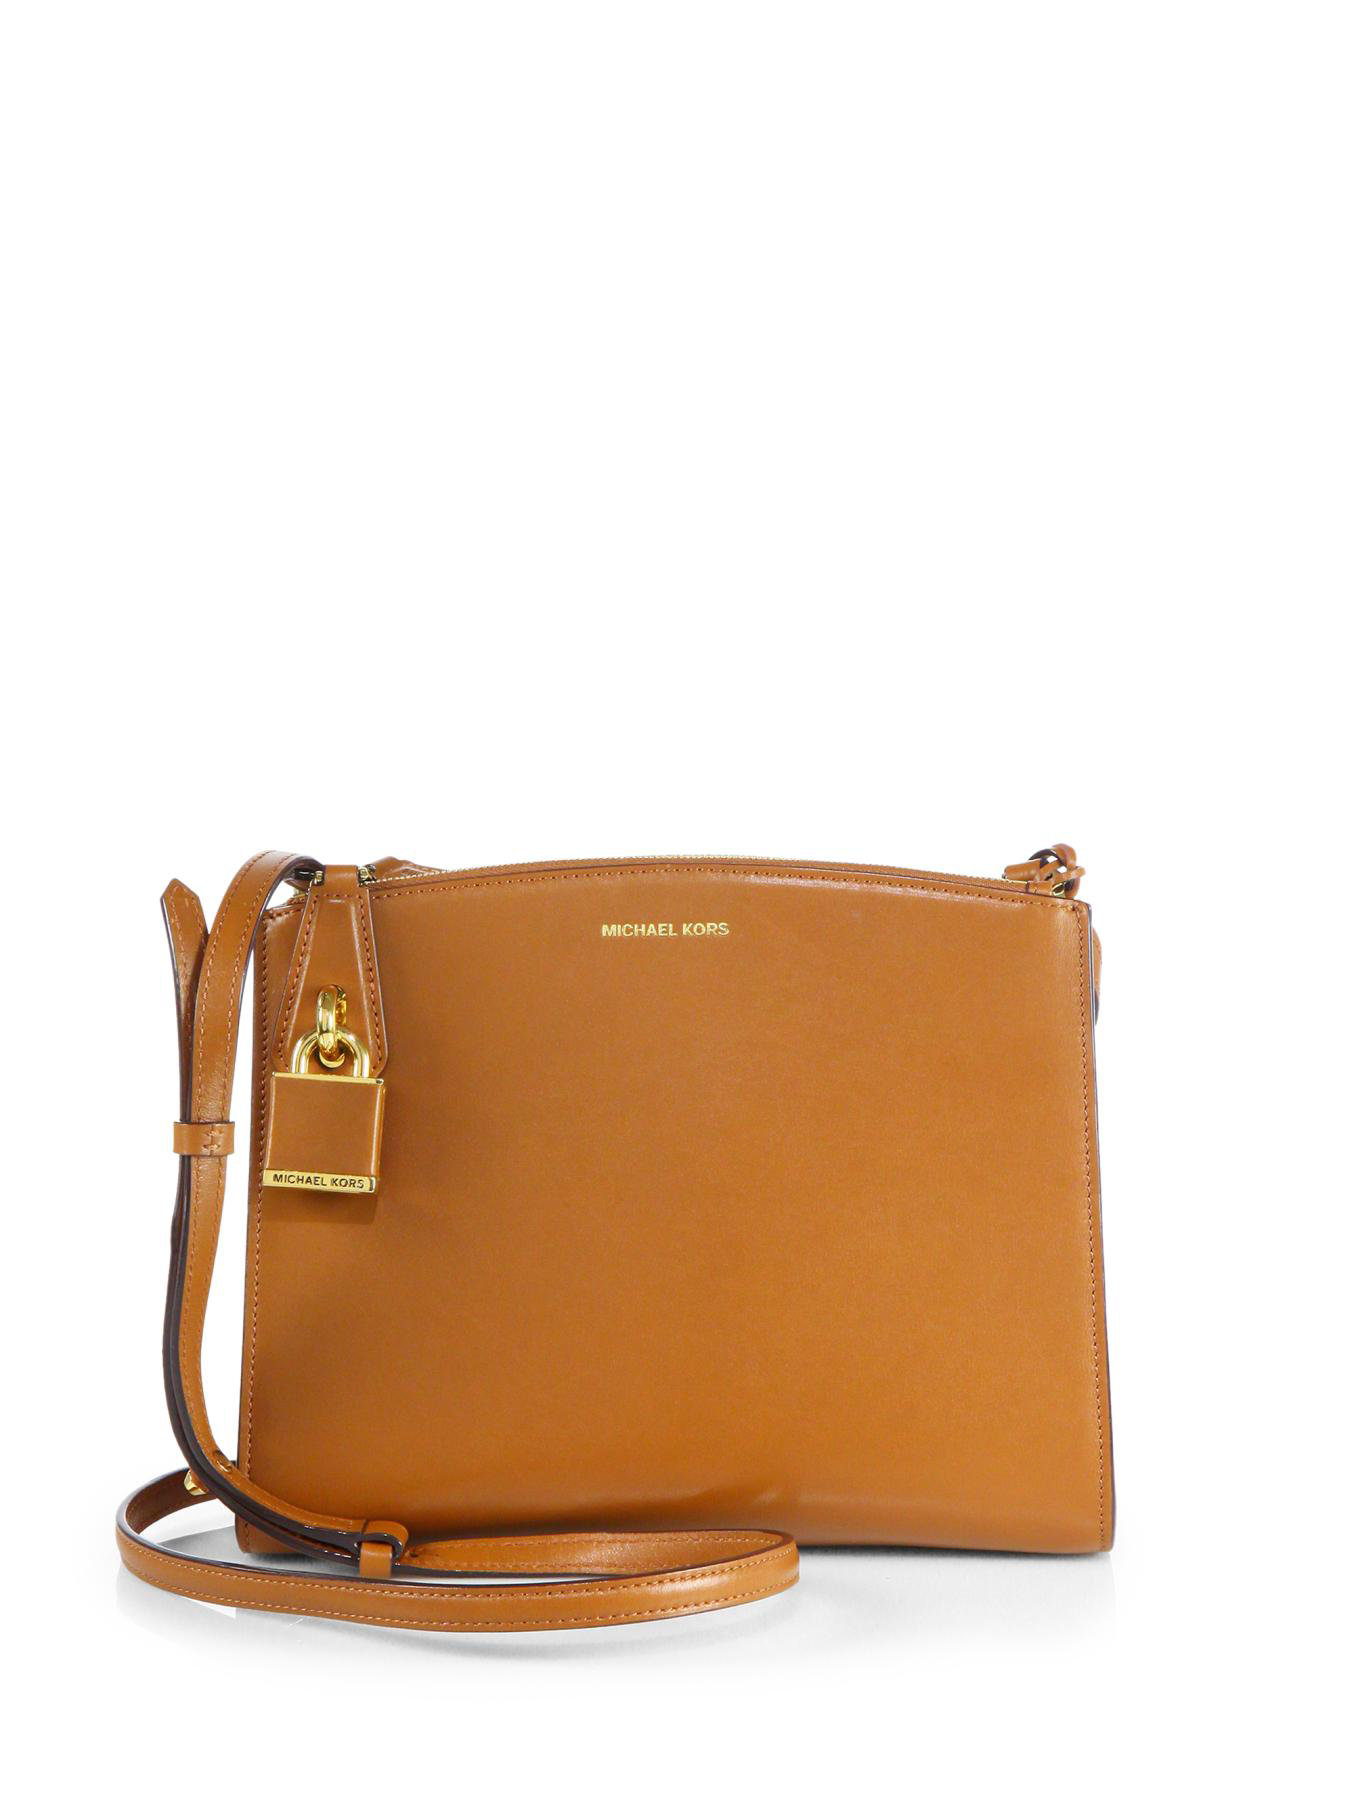 Michael Kors Casey Small Crossbody Bag in Brown (LUGGAGE) | Lyst